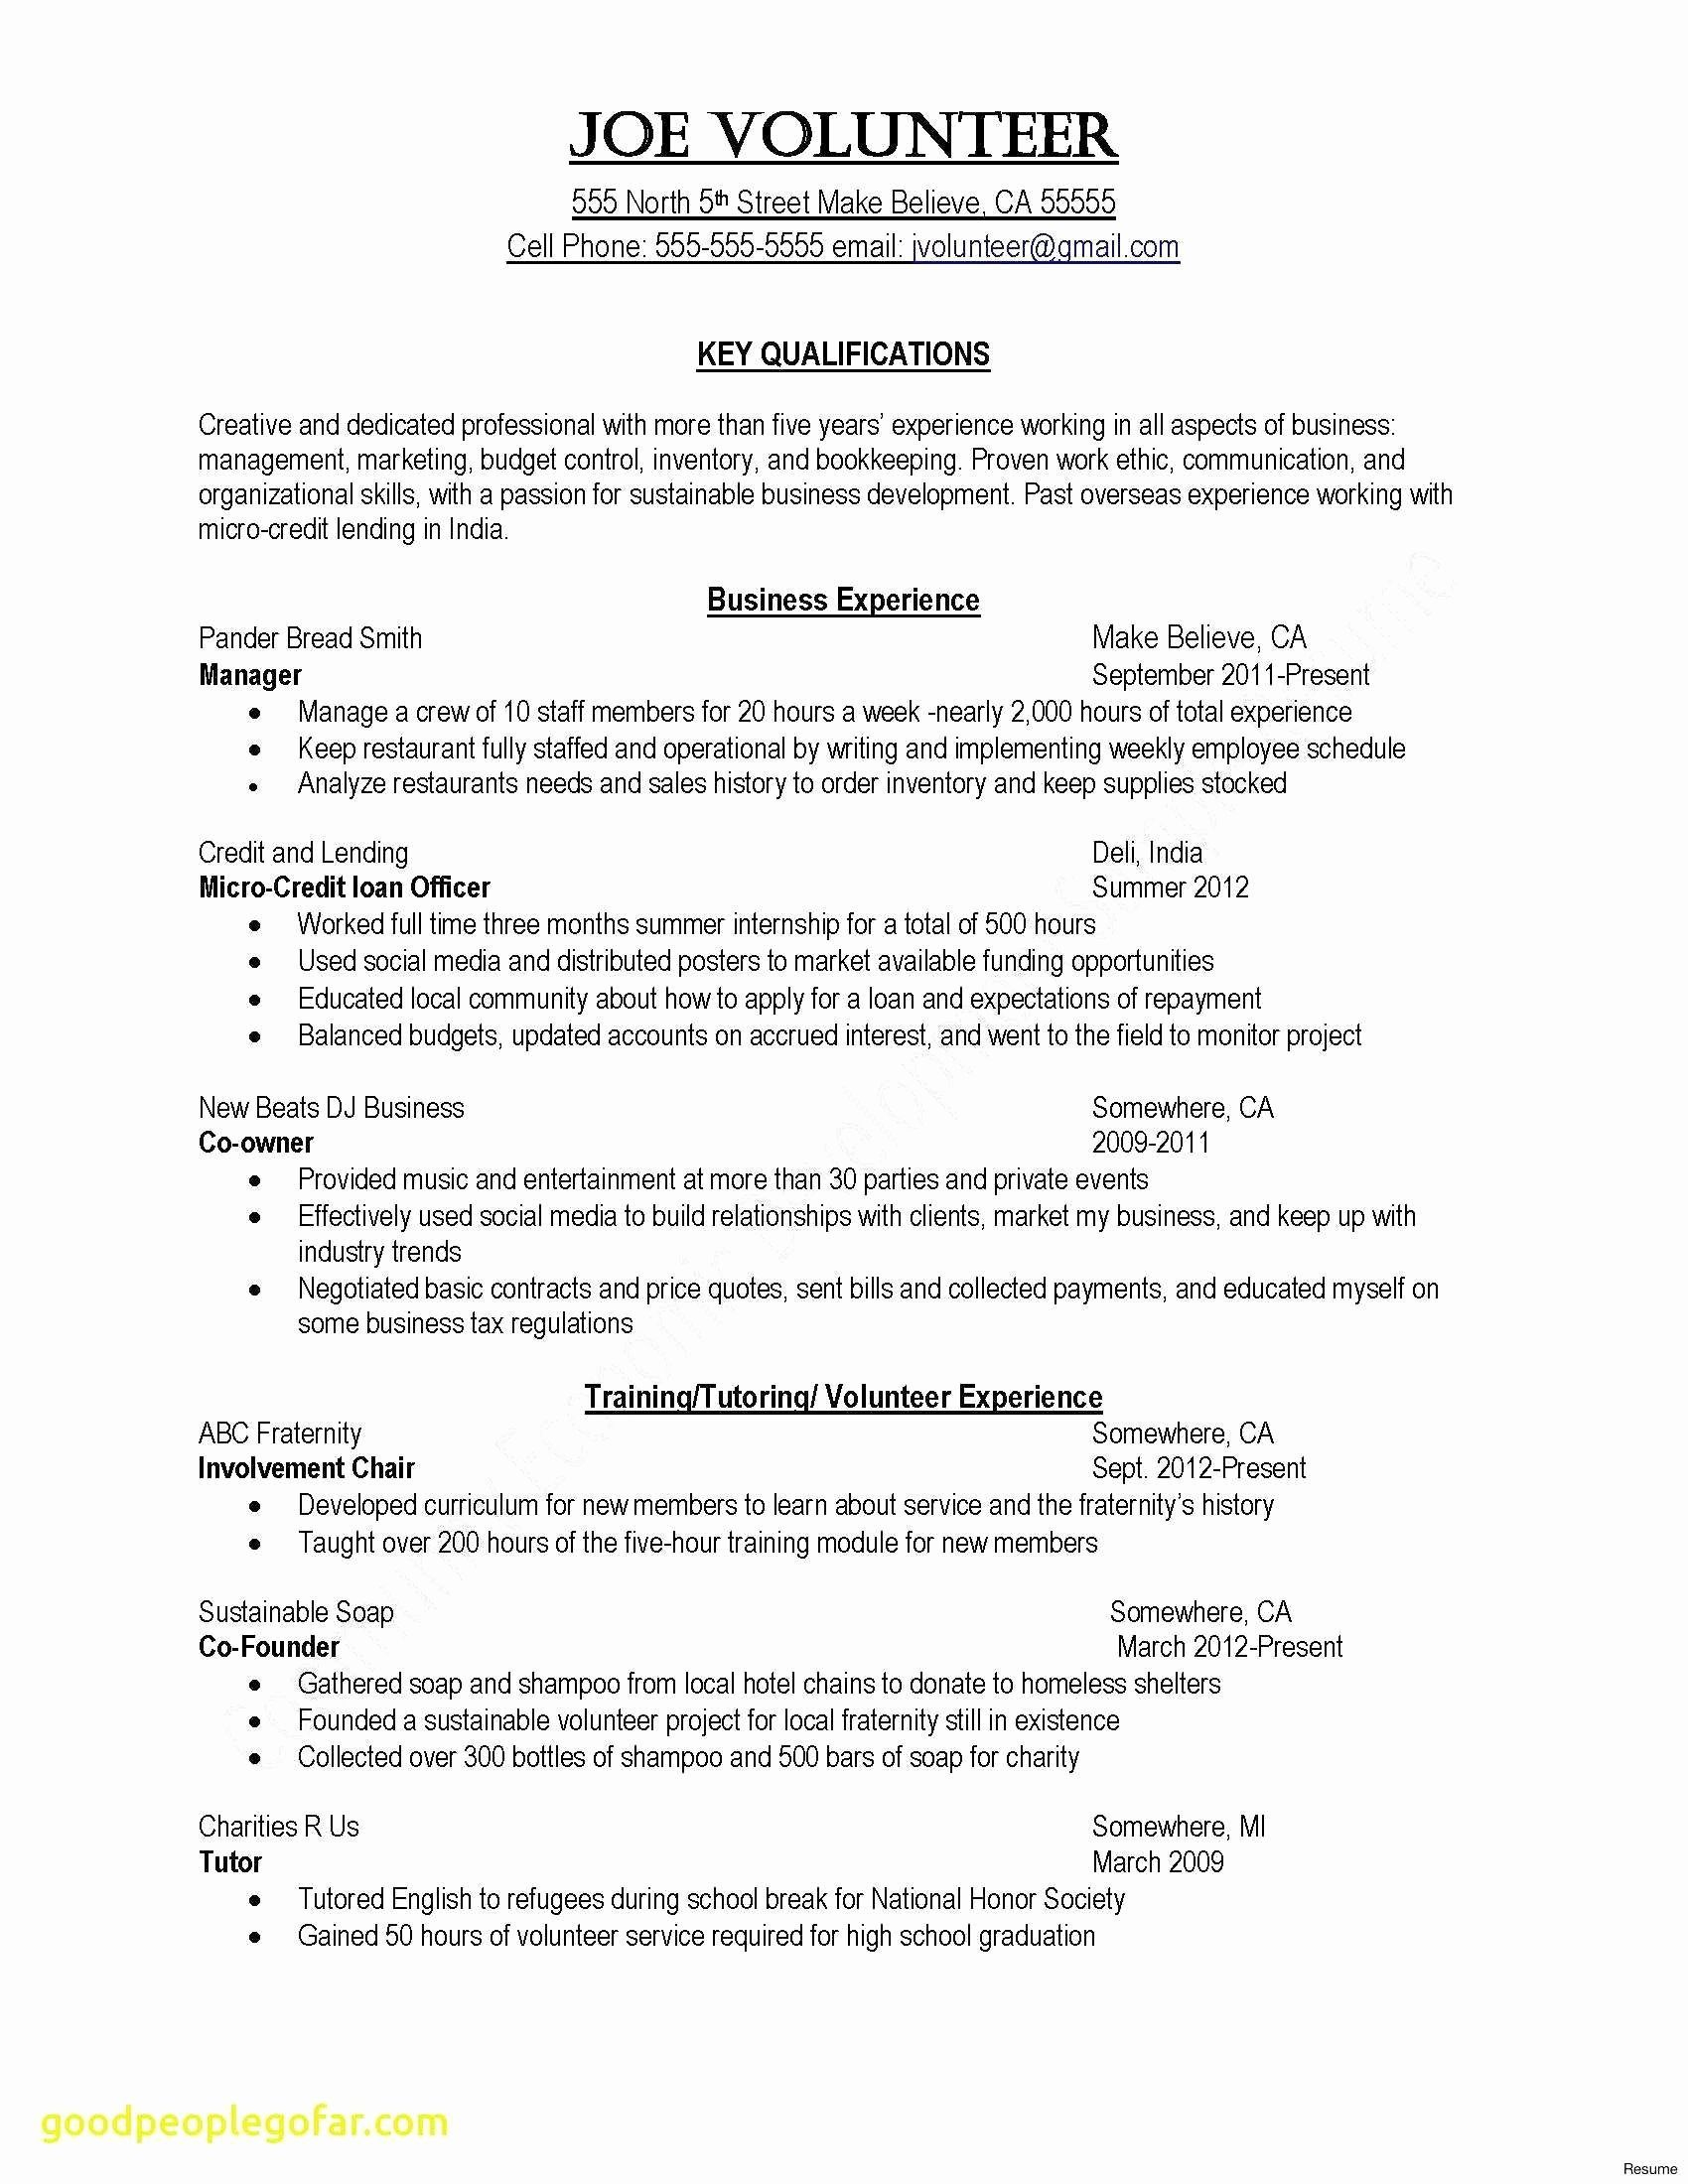 Sample Statement Of Qualifications For State Of California - Resume Layout with regard to Personal Statement Of Qualifications Template